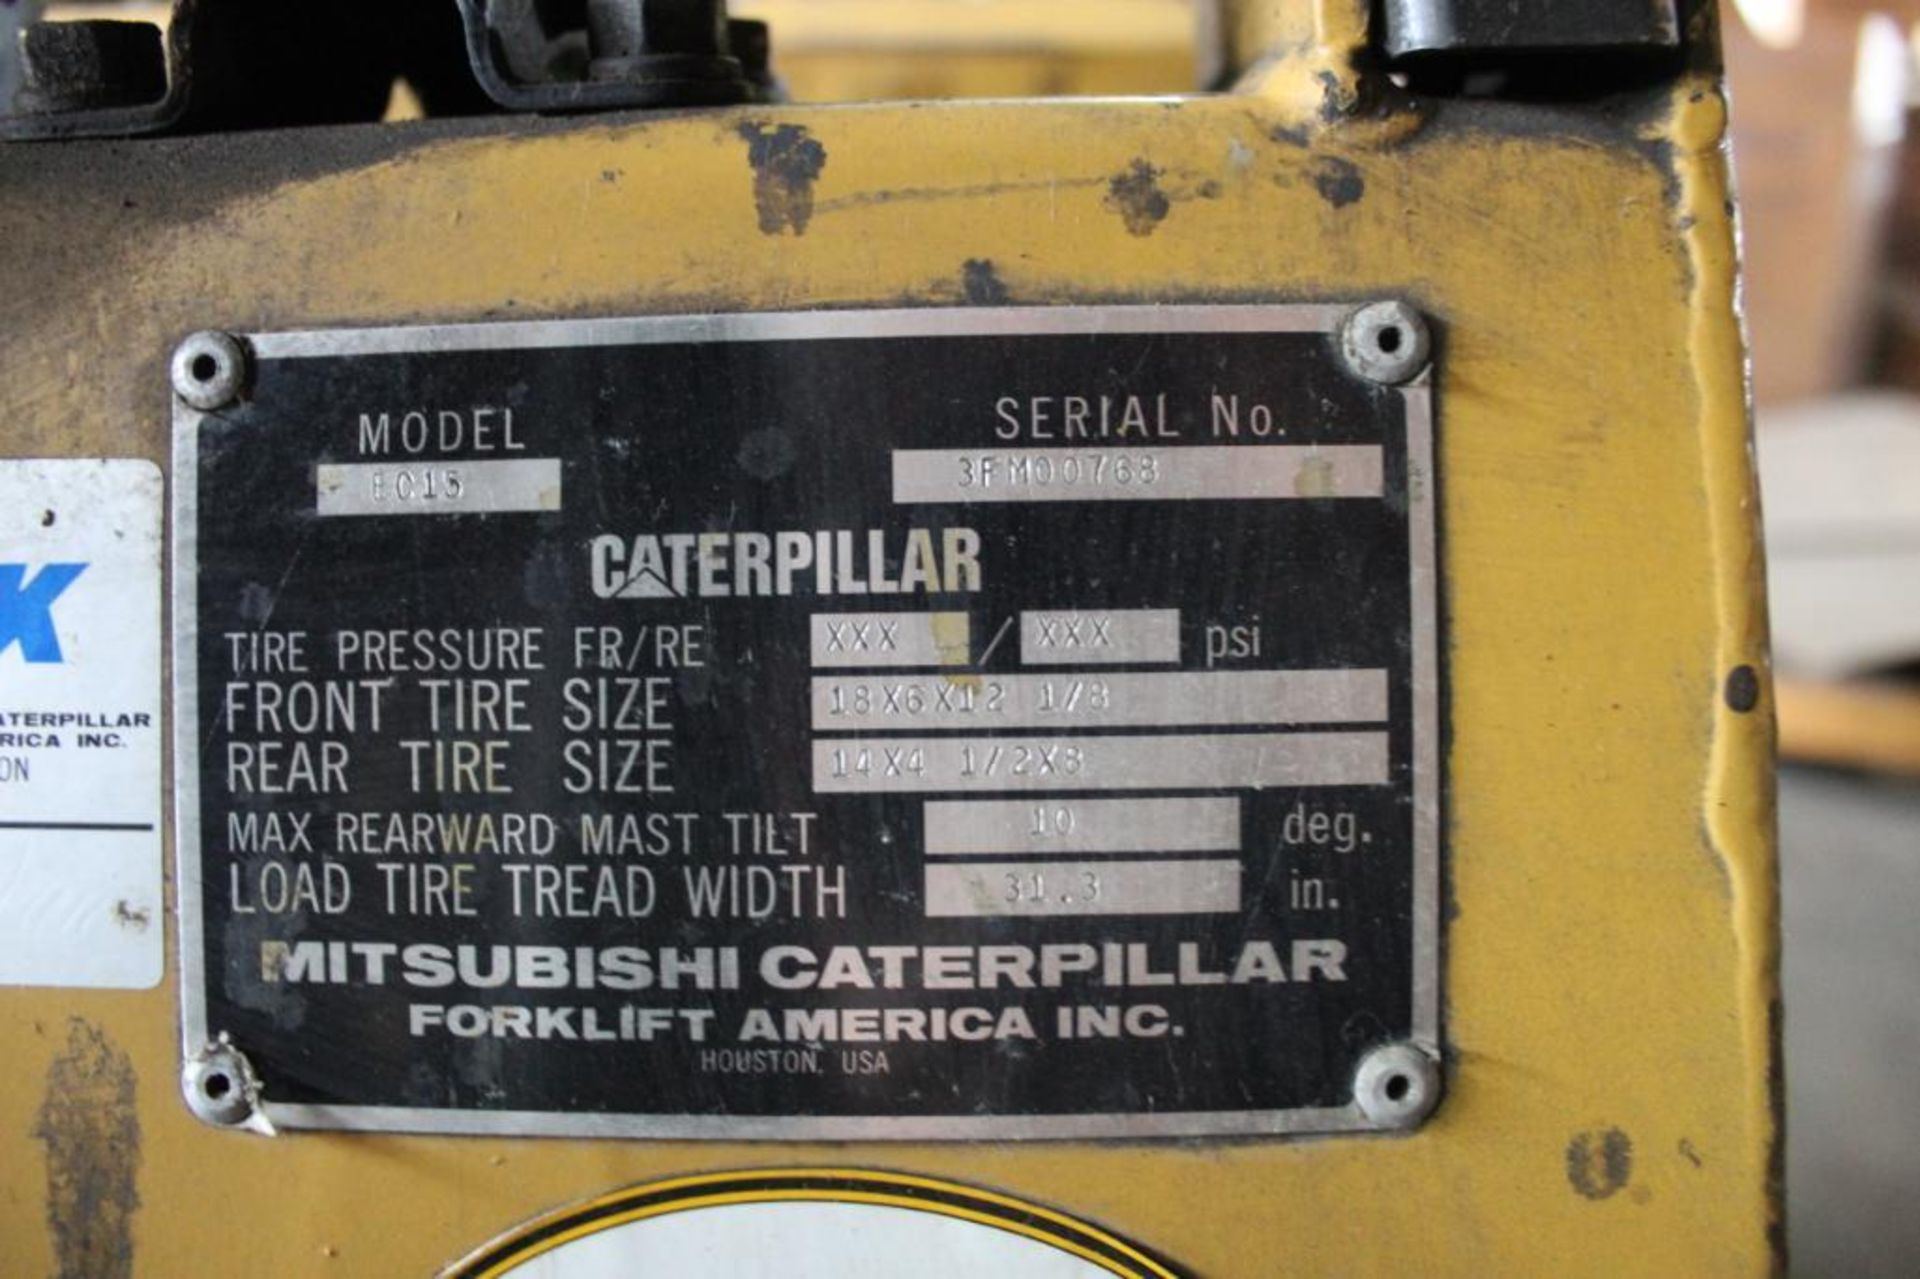 Caterpillar Electric Forklift Model 8015, Side Shifter, 3000 lb. Capacity, Dual Mast 130 in. - Image 5 of 5